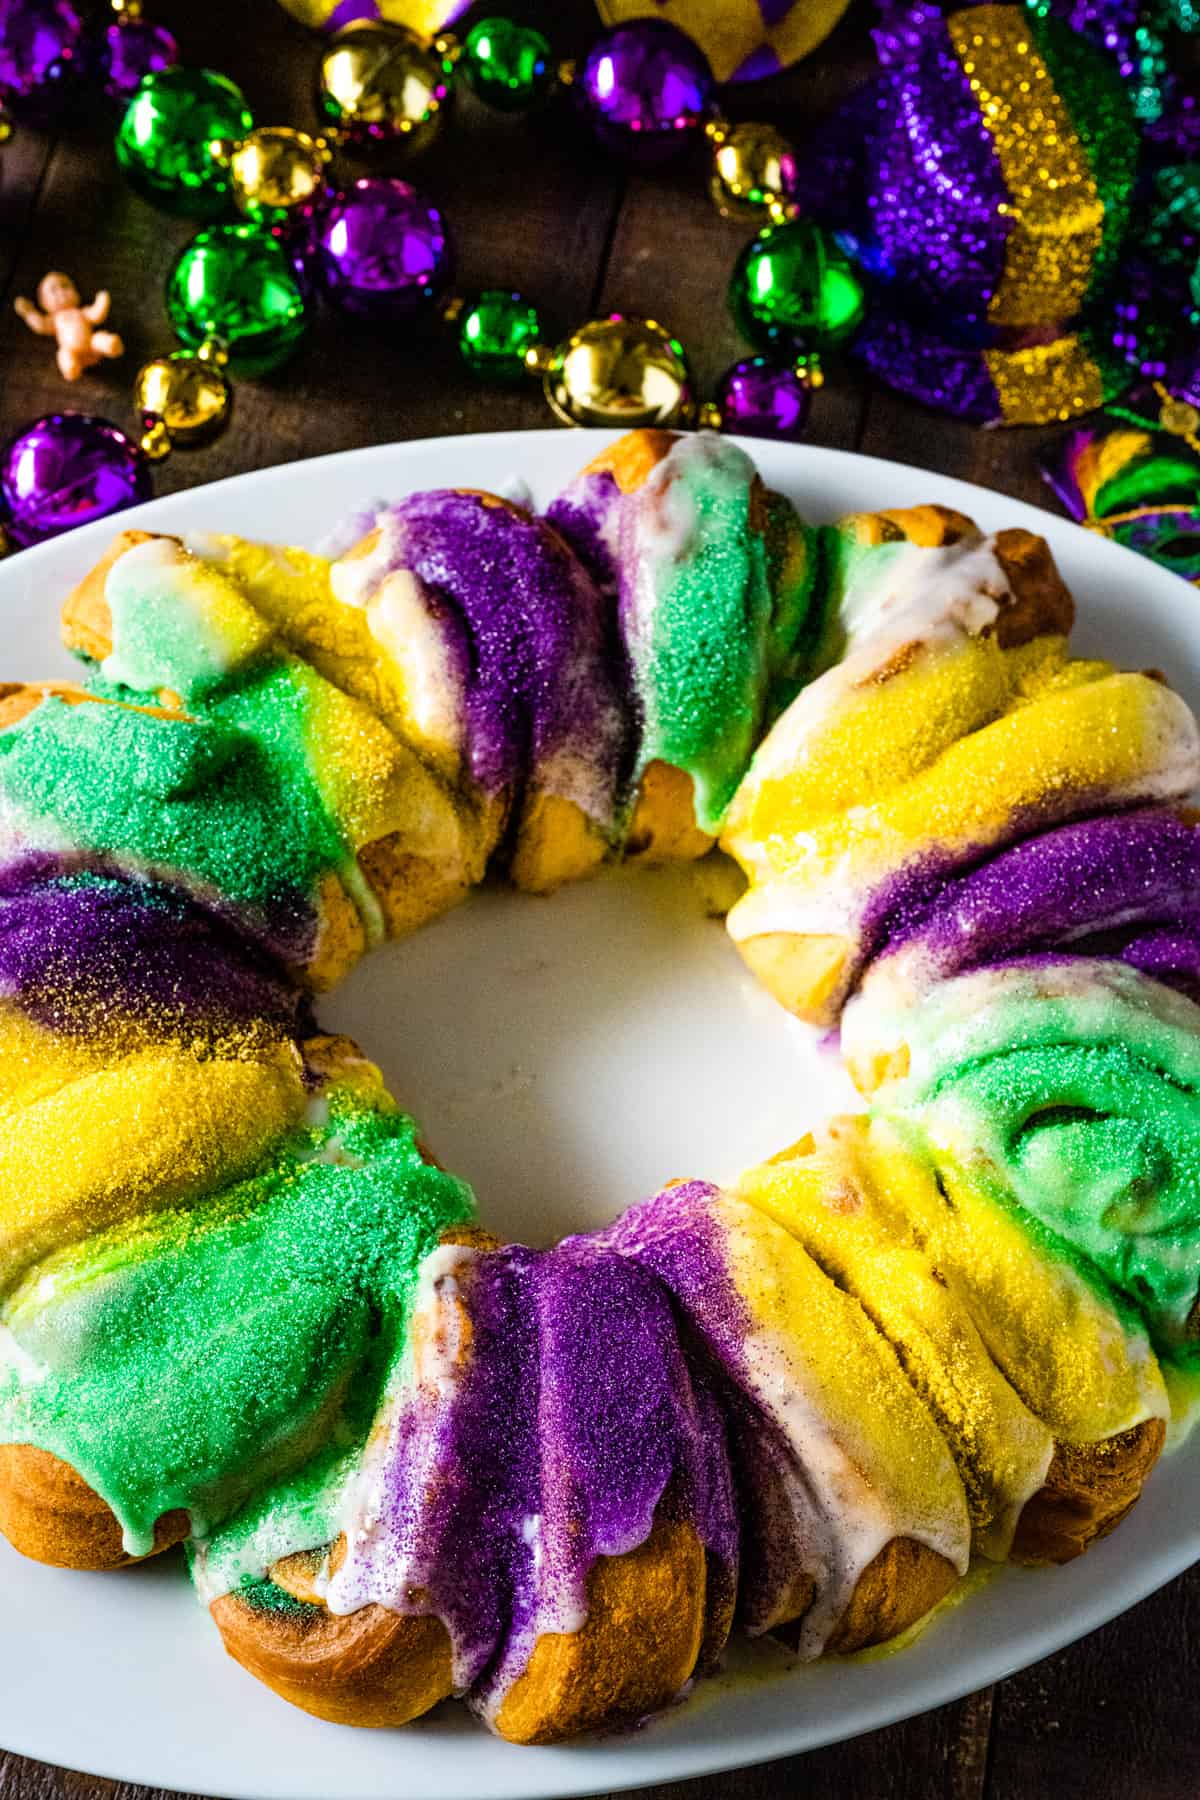 A whole easy king cake with mardi gras beads scattered about on the table.